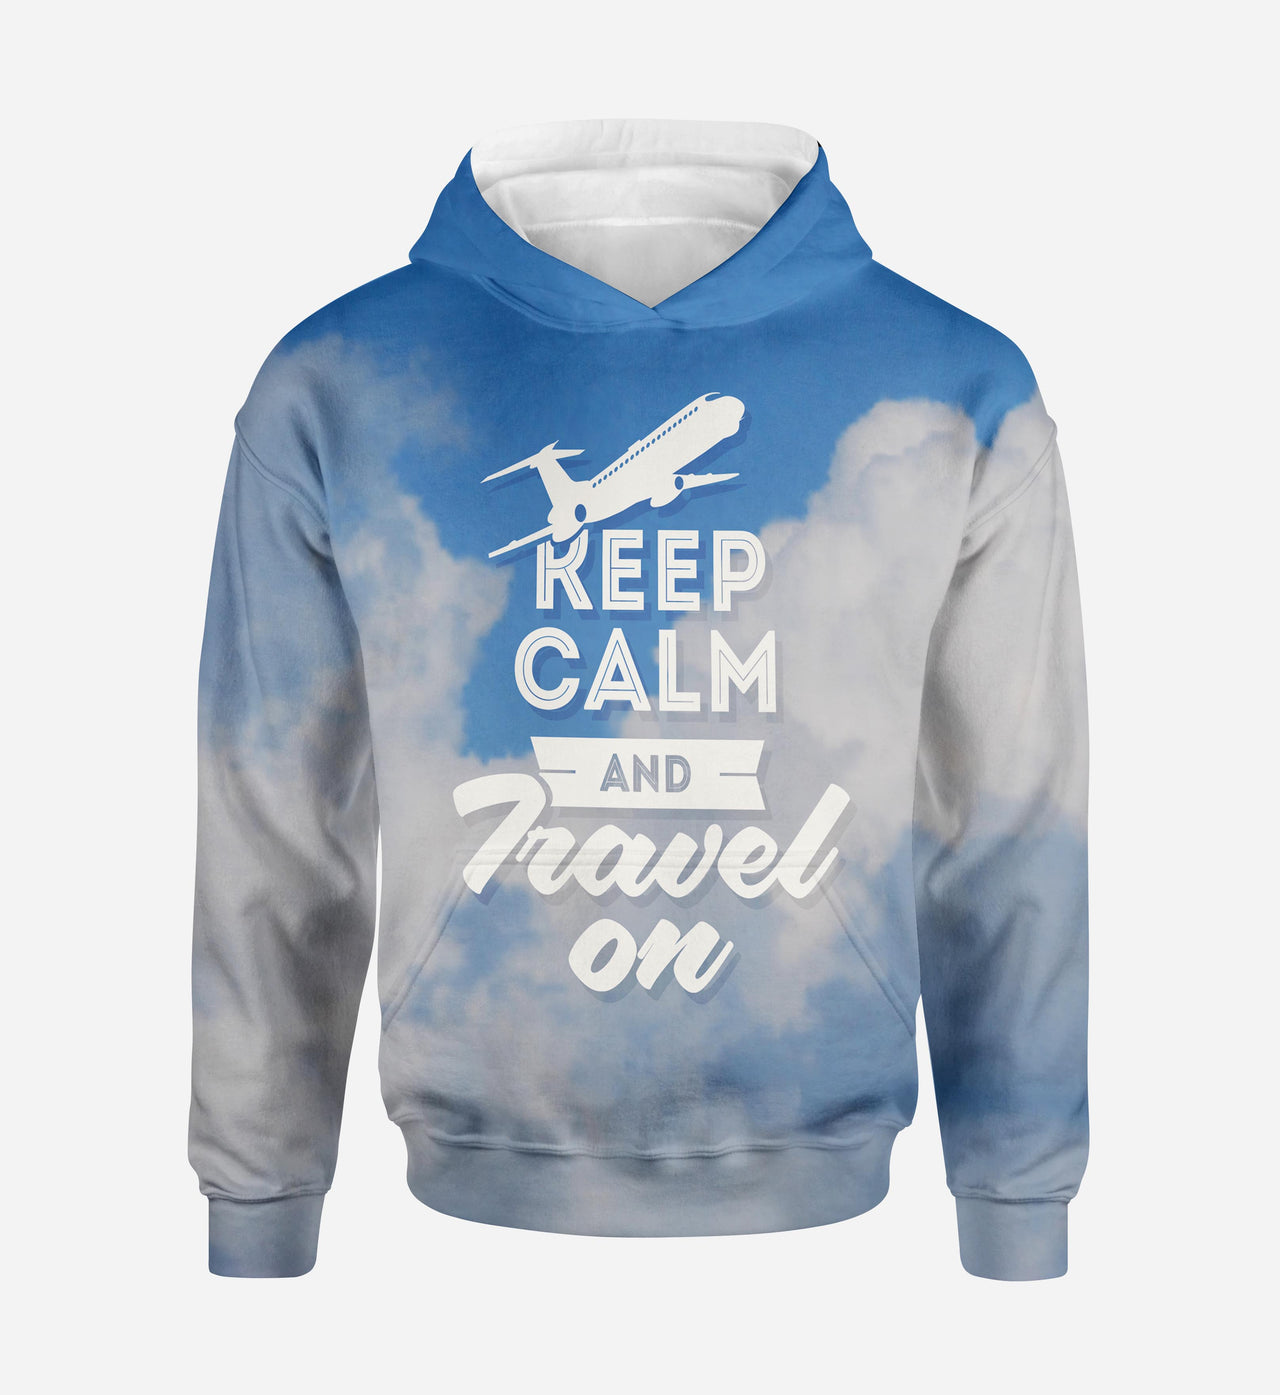 Keep Calm and Travel On Printed 3D Hoodies